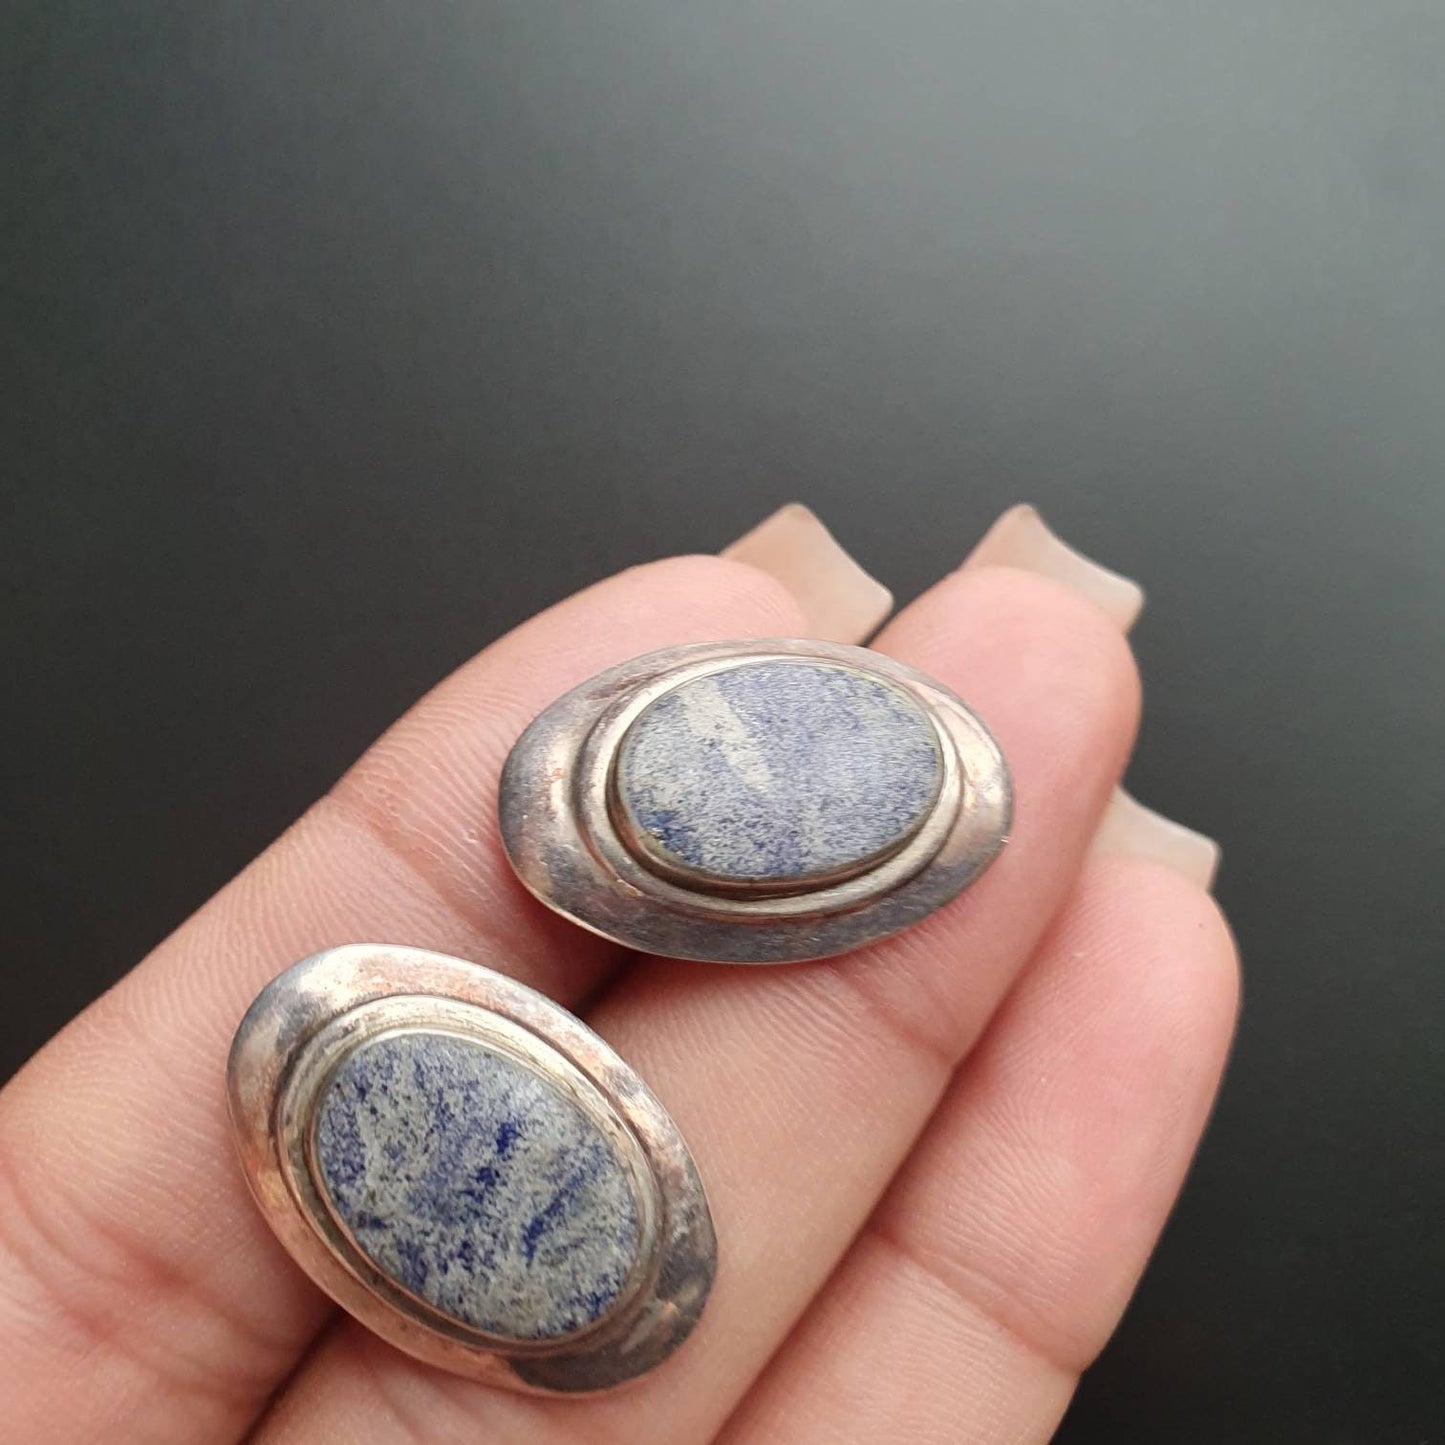 Stud earrings, Lapis gemstone, sterling silver, oval,vintage jewelry, unique,gifts,classical, Victorian, dainty jewellery,handmade jewelry